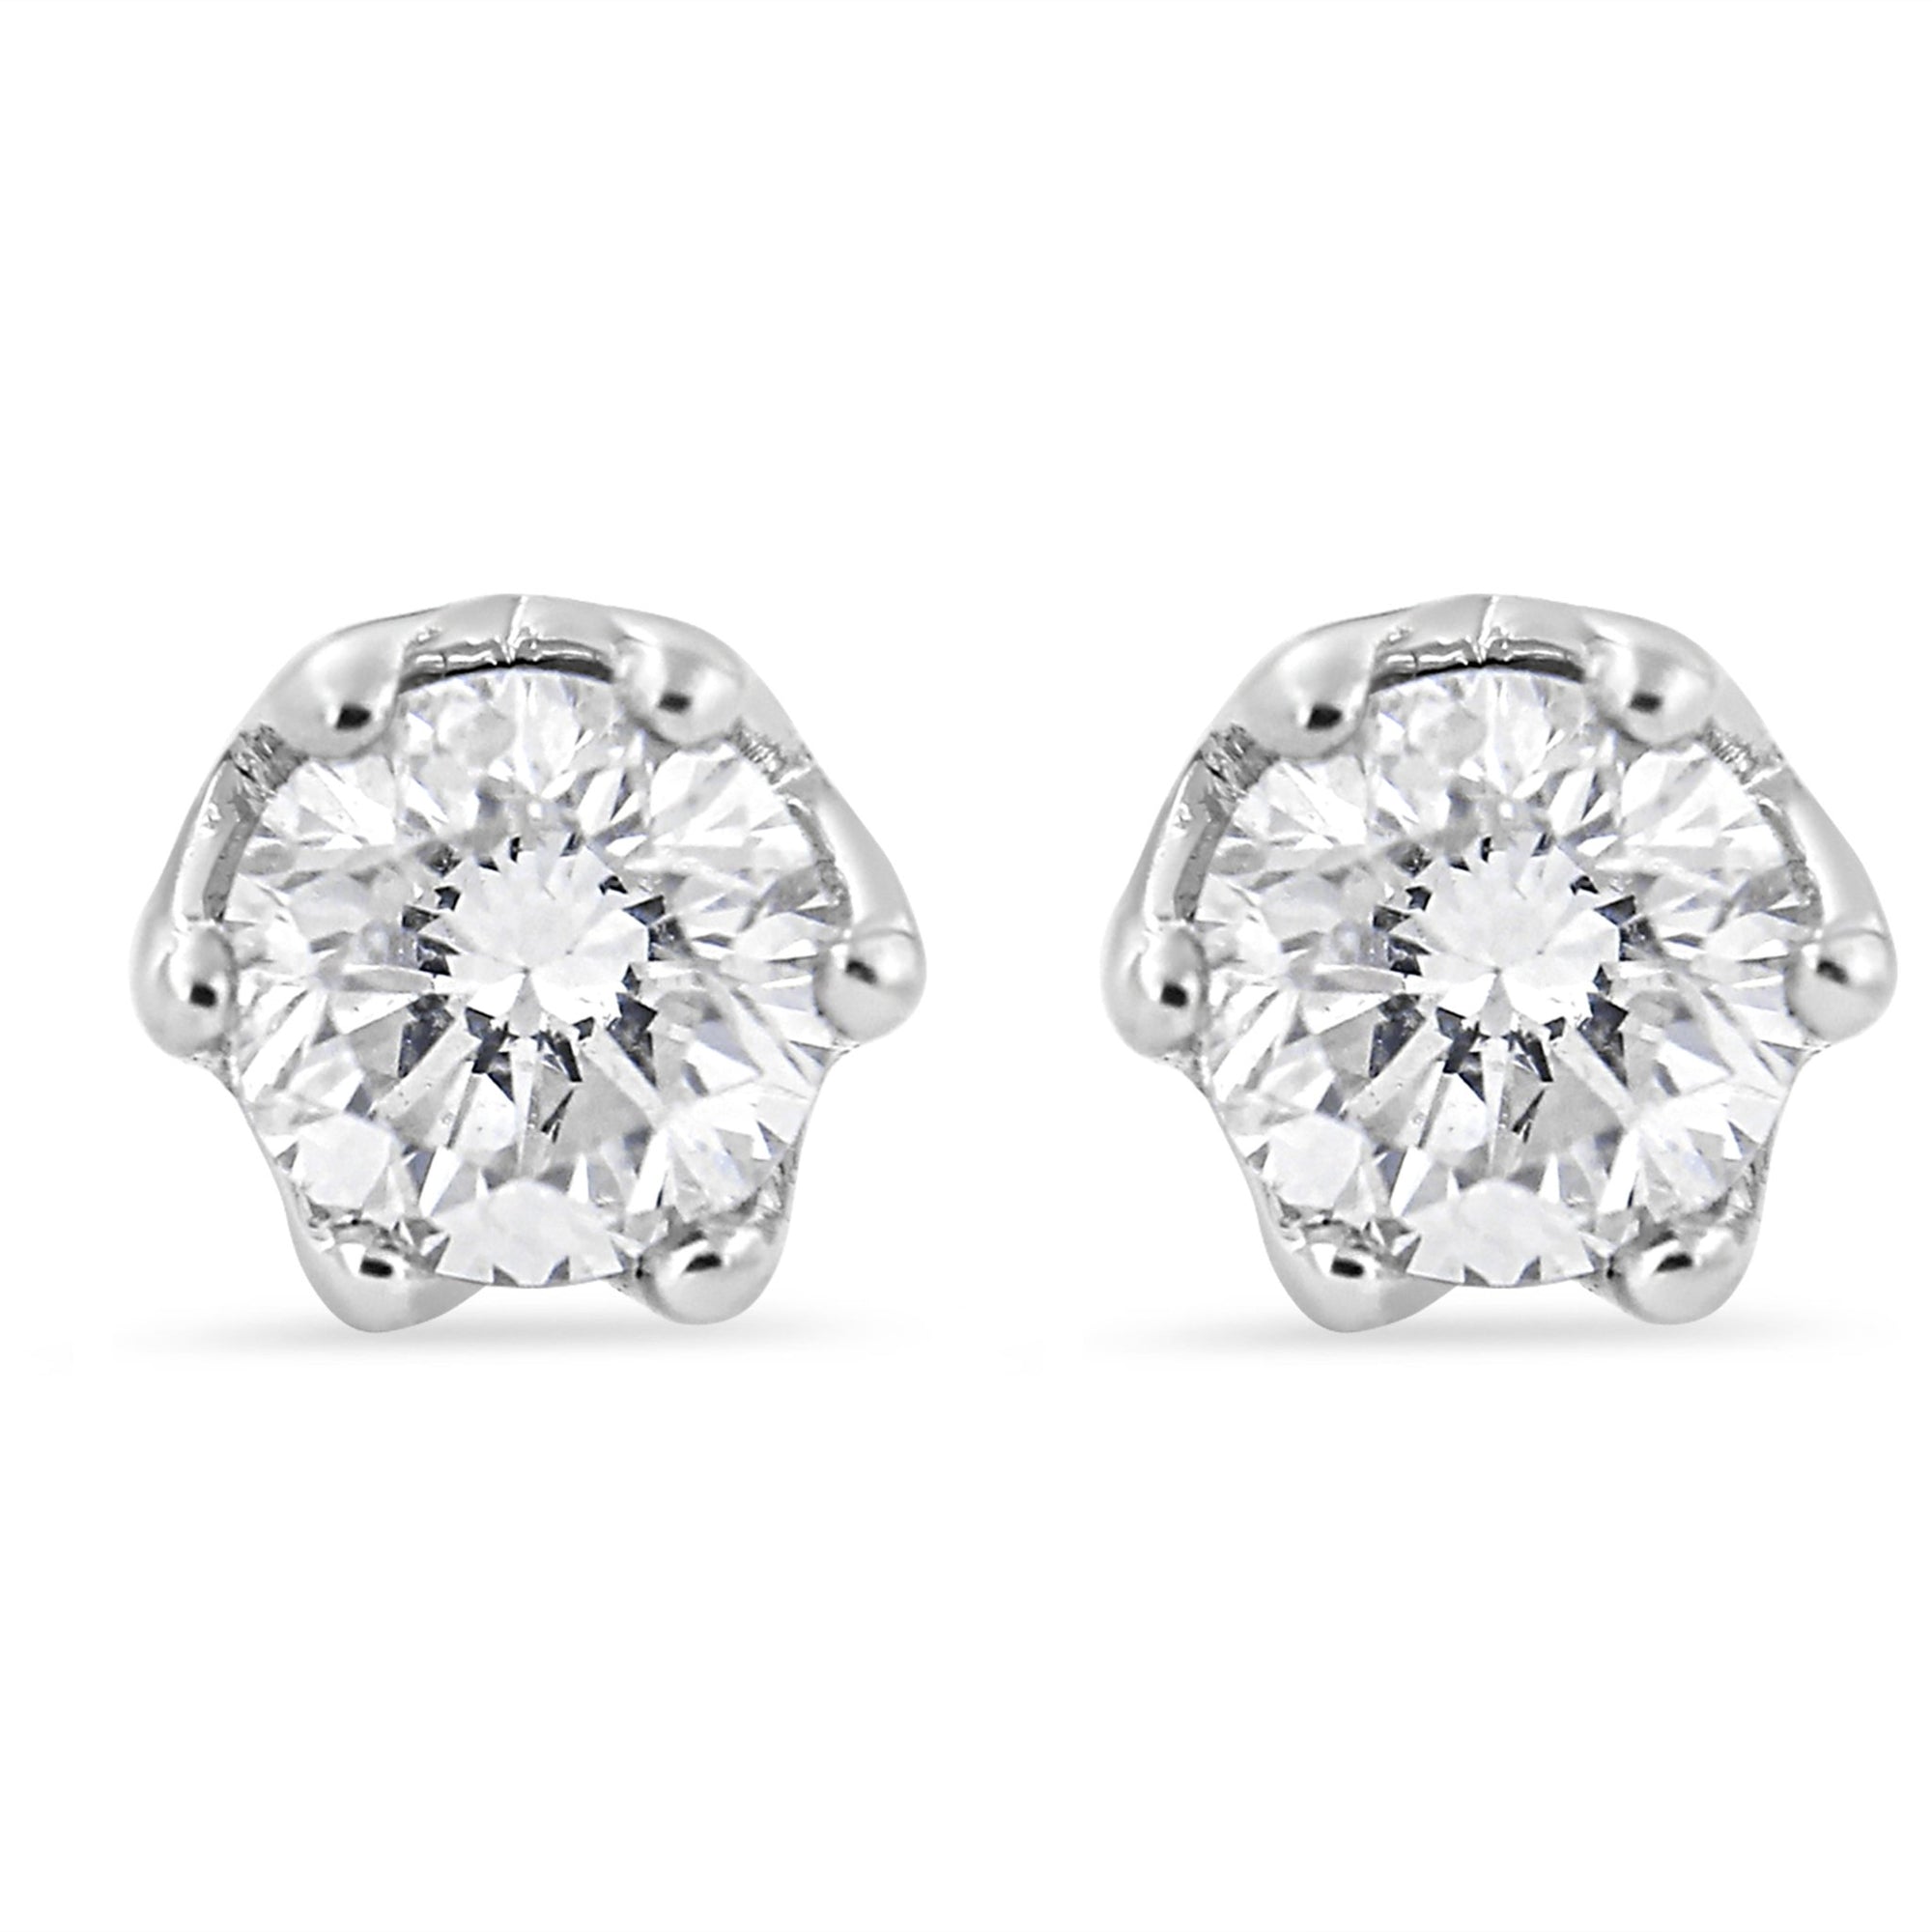 14K White Gold 1/2 Cttw Round Diamond 6 Prong Crown Stud Earrings (I-J Color, I1-I2 Clarity) - LinkagejewelrydesignLinkagejewelrydesign